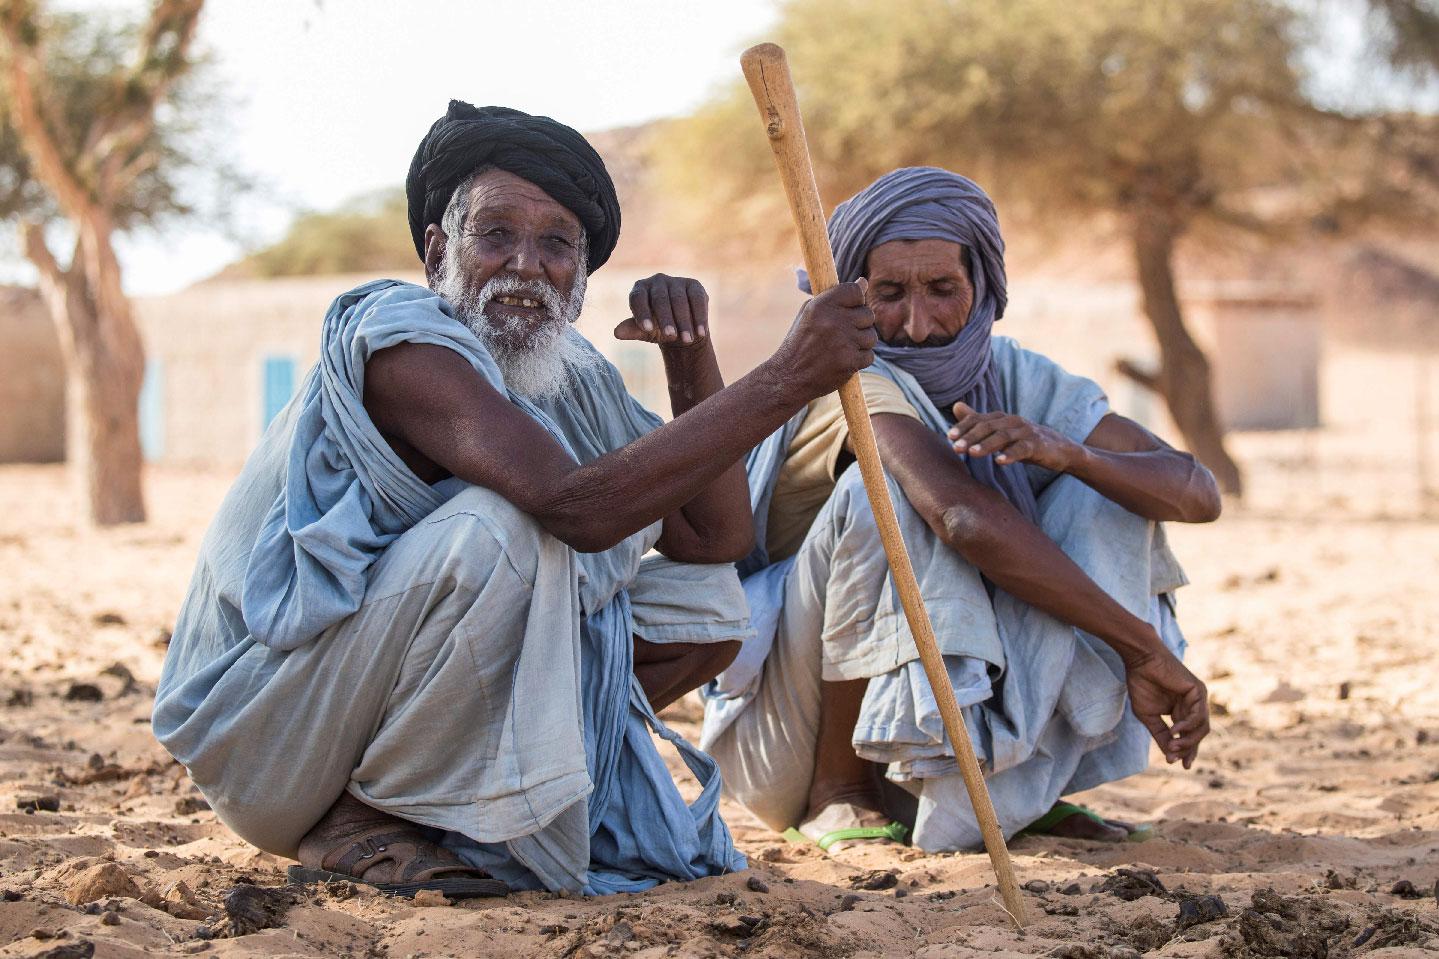 Men sit on the ground in Ouad Initi, eastern Mauritania, on November 21, 2018.